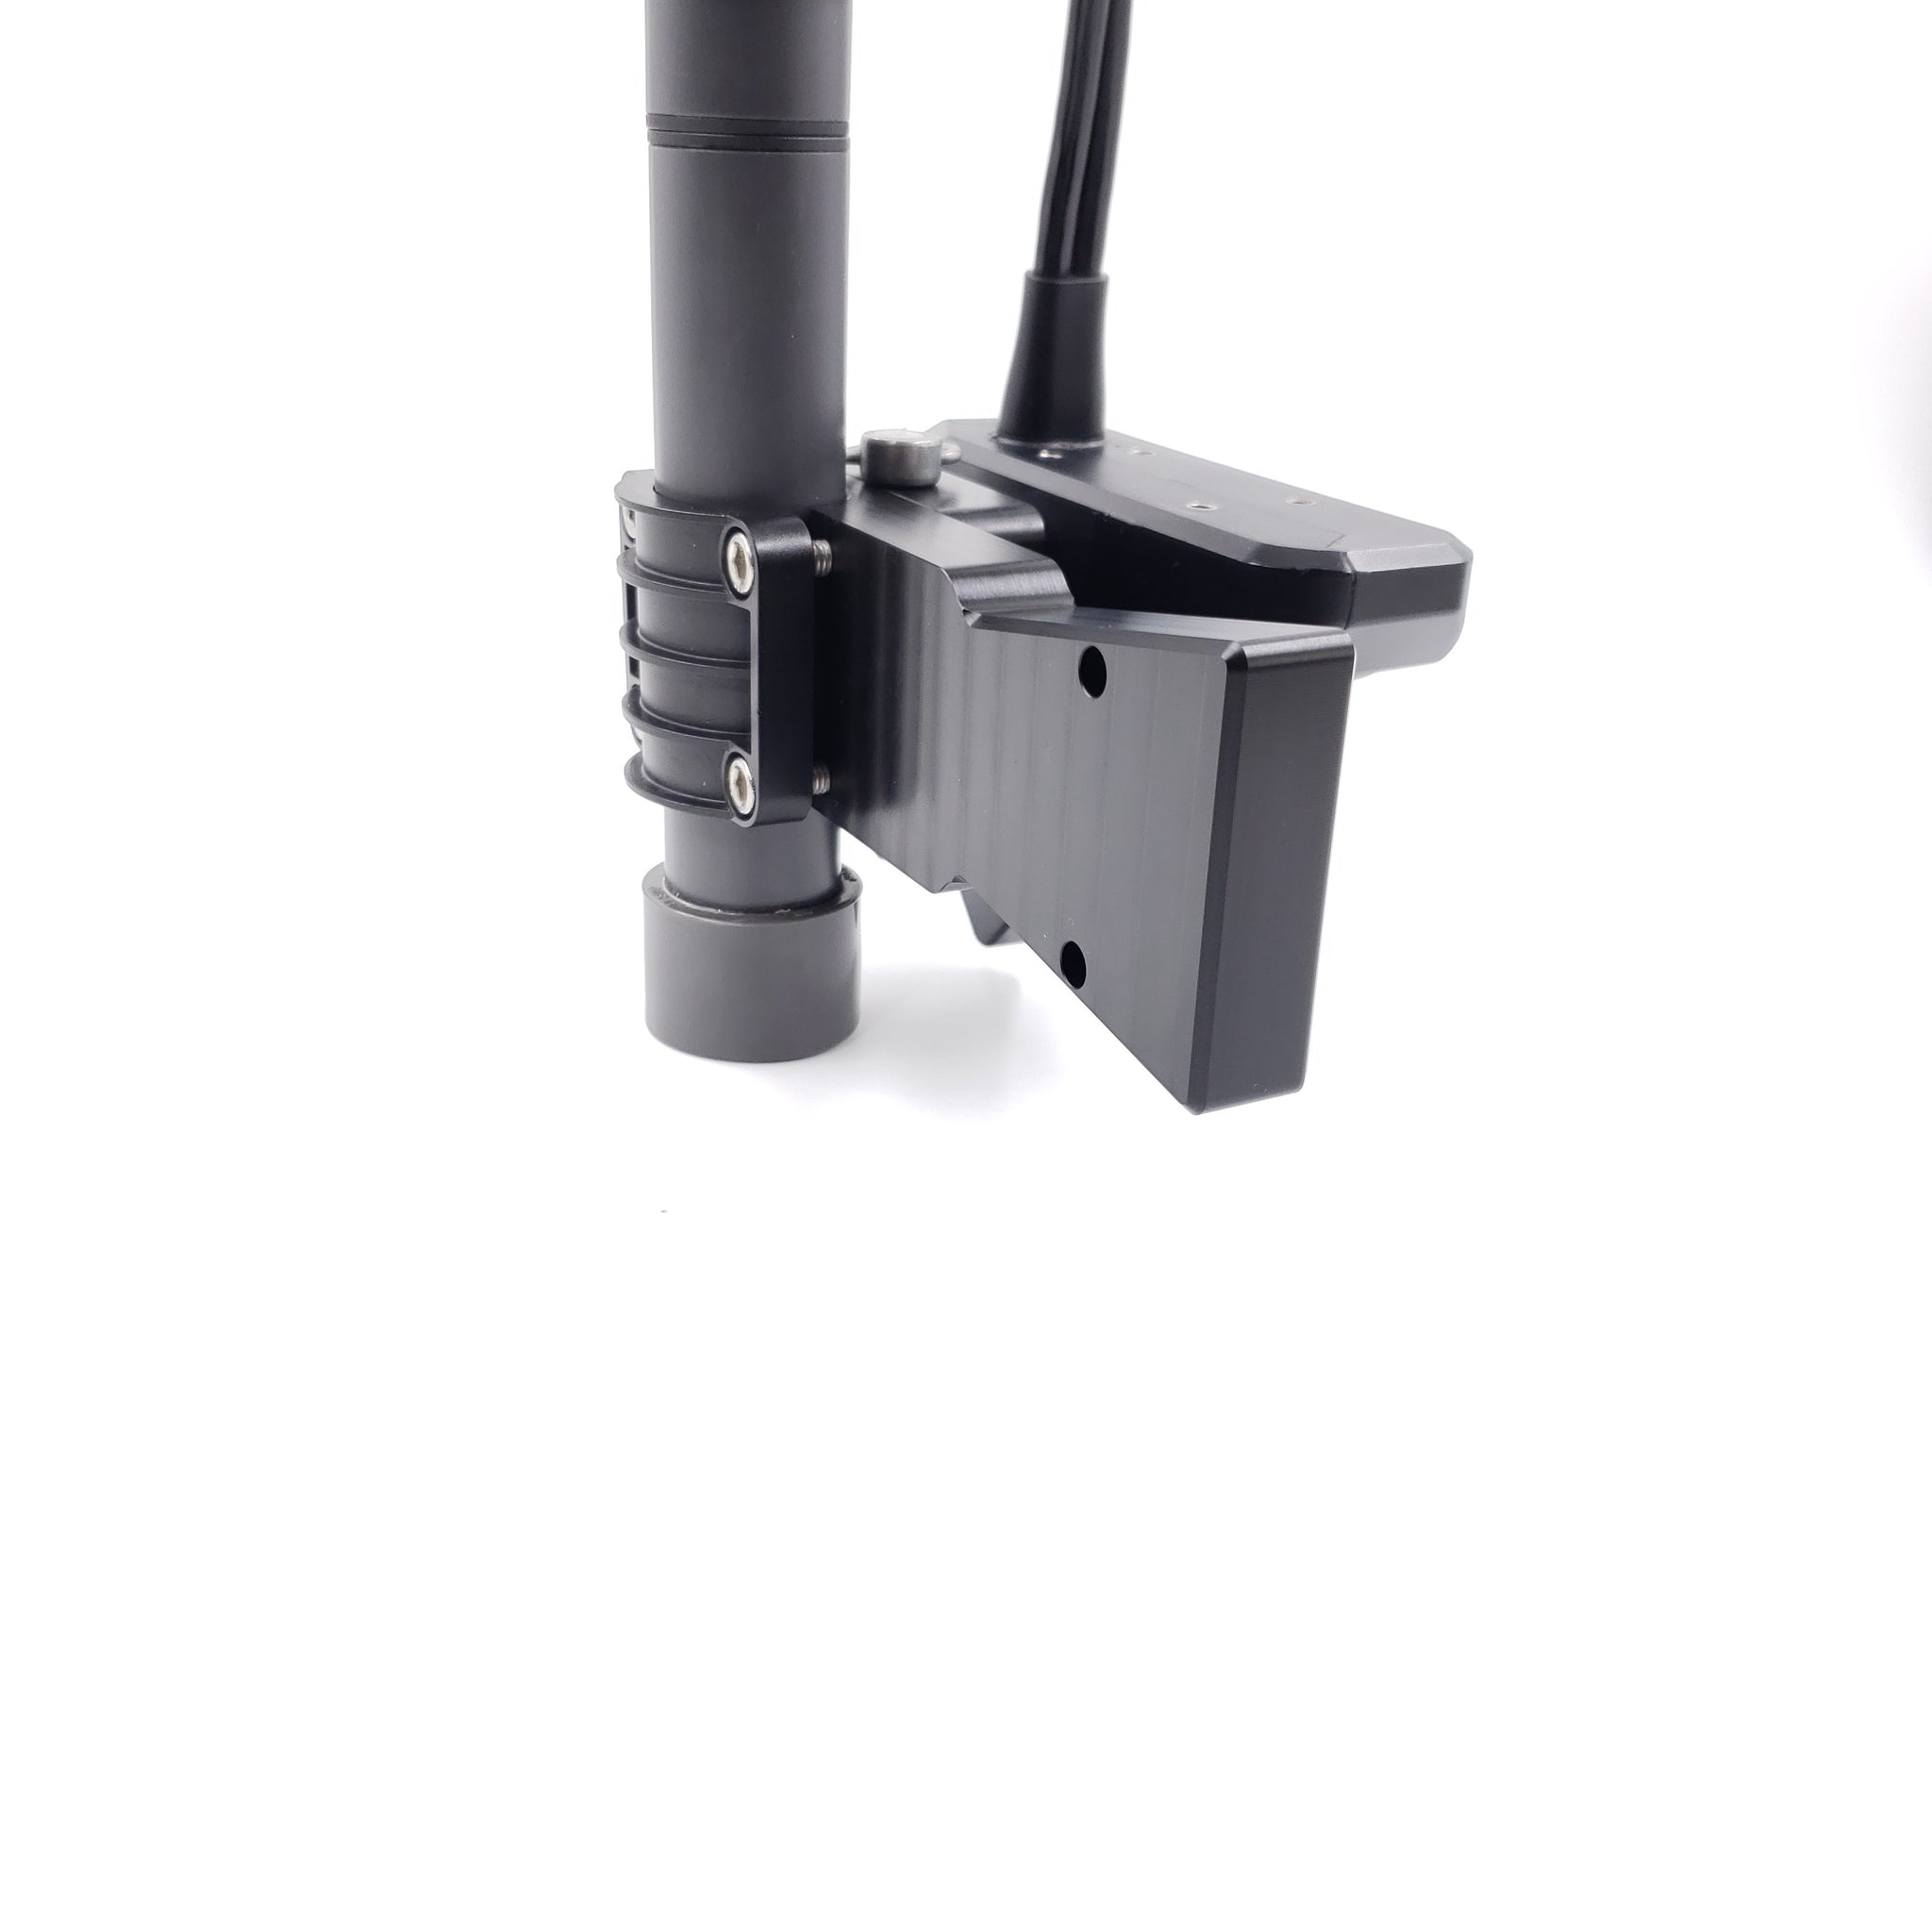 Presenting the Cable Steer Live View Transducer Mount! Proudly